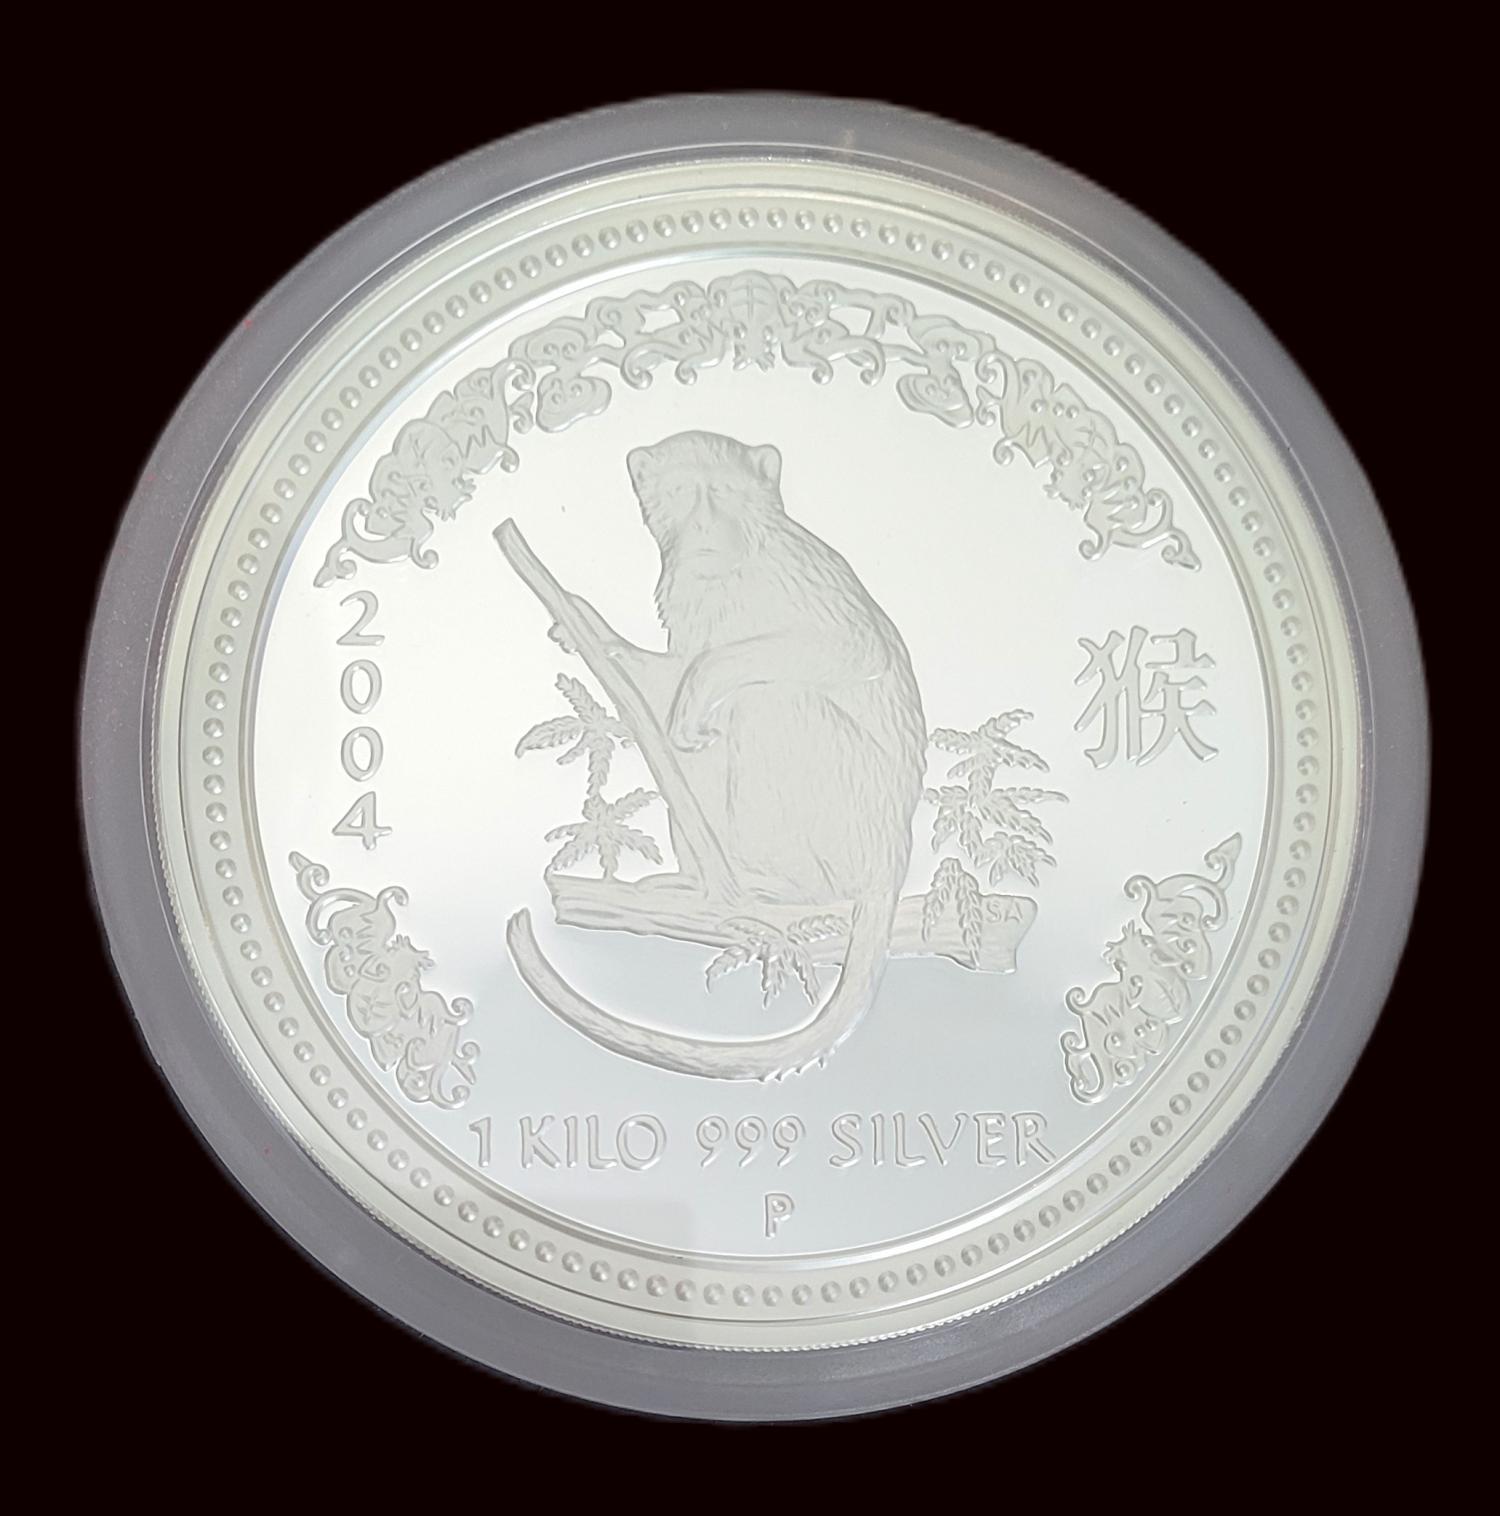 Thumbnail for 2004 Year Of The Monkey 1 KILO Silver Proof in capsule only.